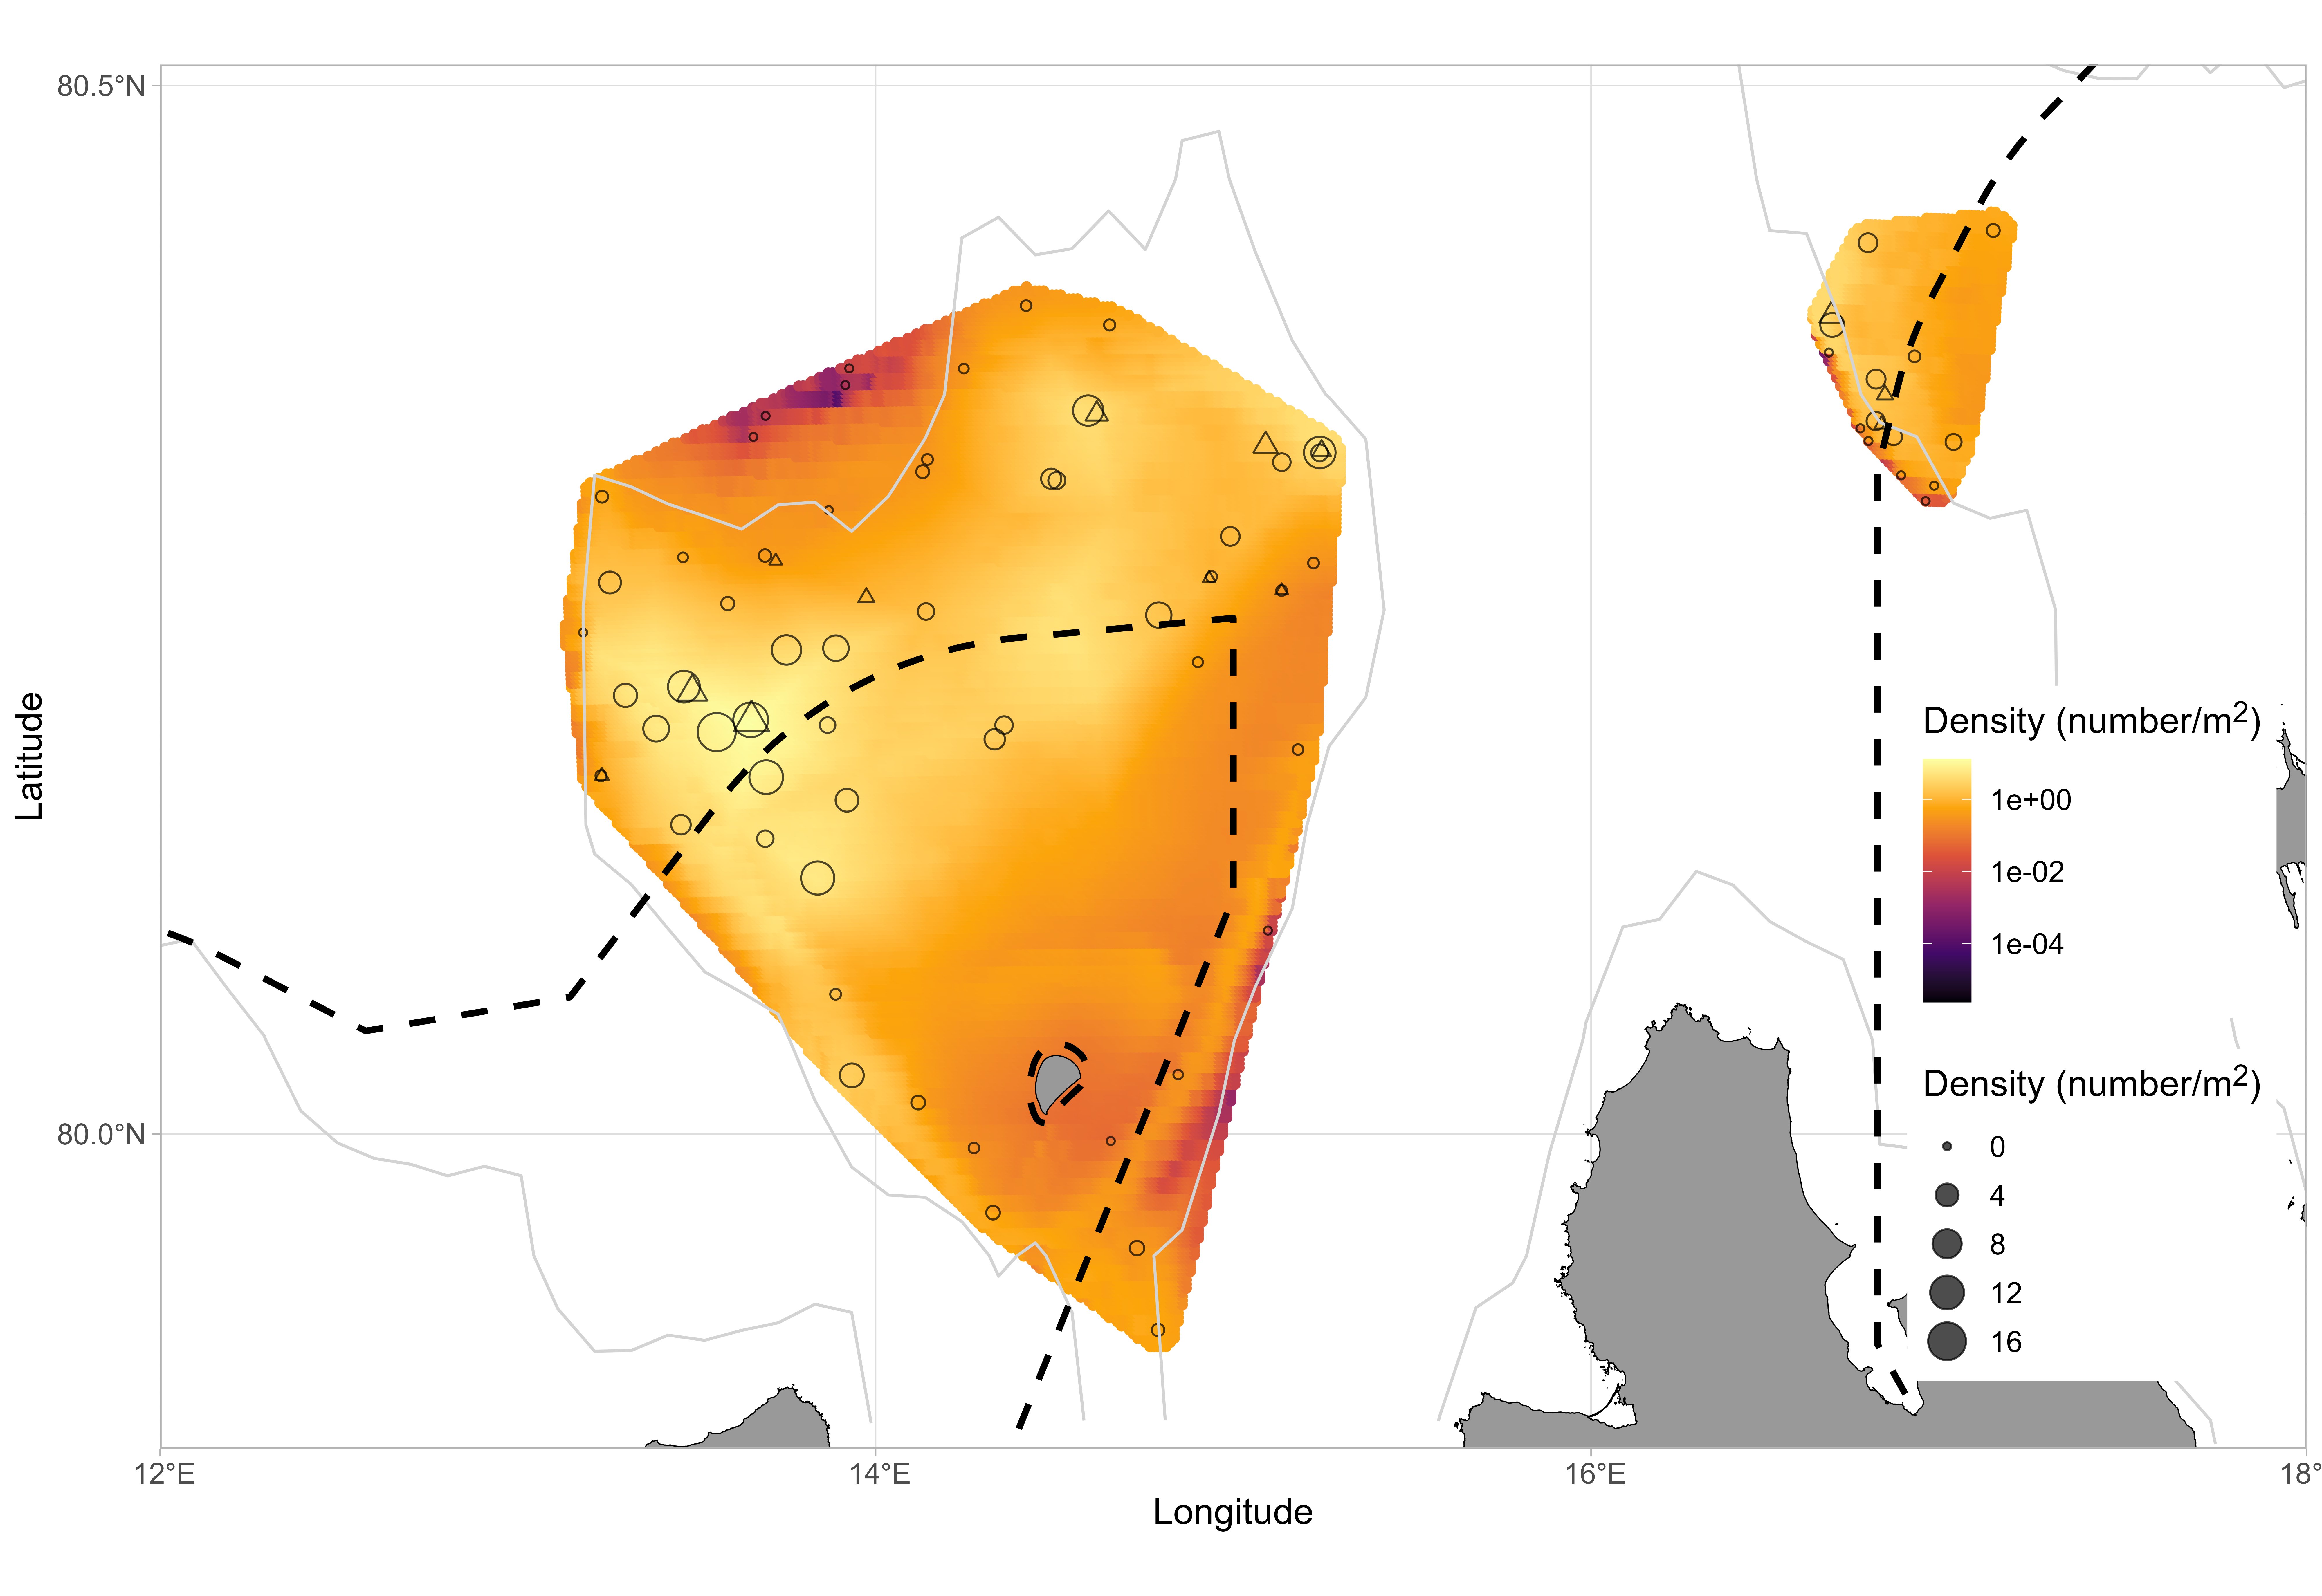 Density of scallops on Moffen and Parryflaket bed. Shown are observed densities from video transects and dredge stations (circles with radius scaled to density) overlaid on predicted densities from spatial GAMM including weighted video and dredge observations used to estimate stock size (color scale). Land masses are indicated in grey, protected areas with dashed lines, and 100m depth contour with solid grey lines. Note that densities are on log10-scale.